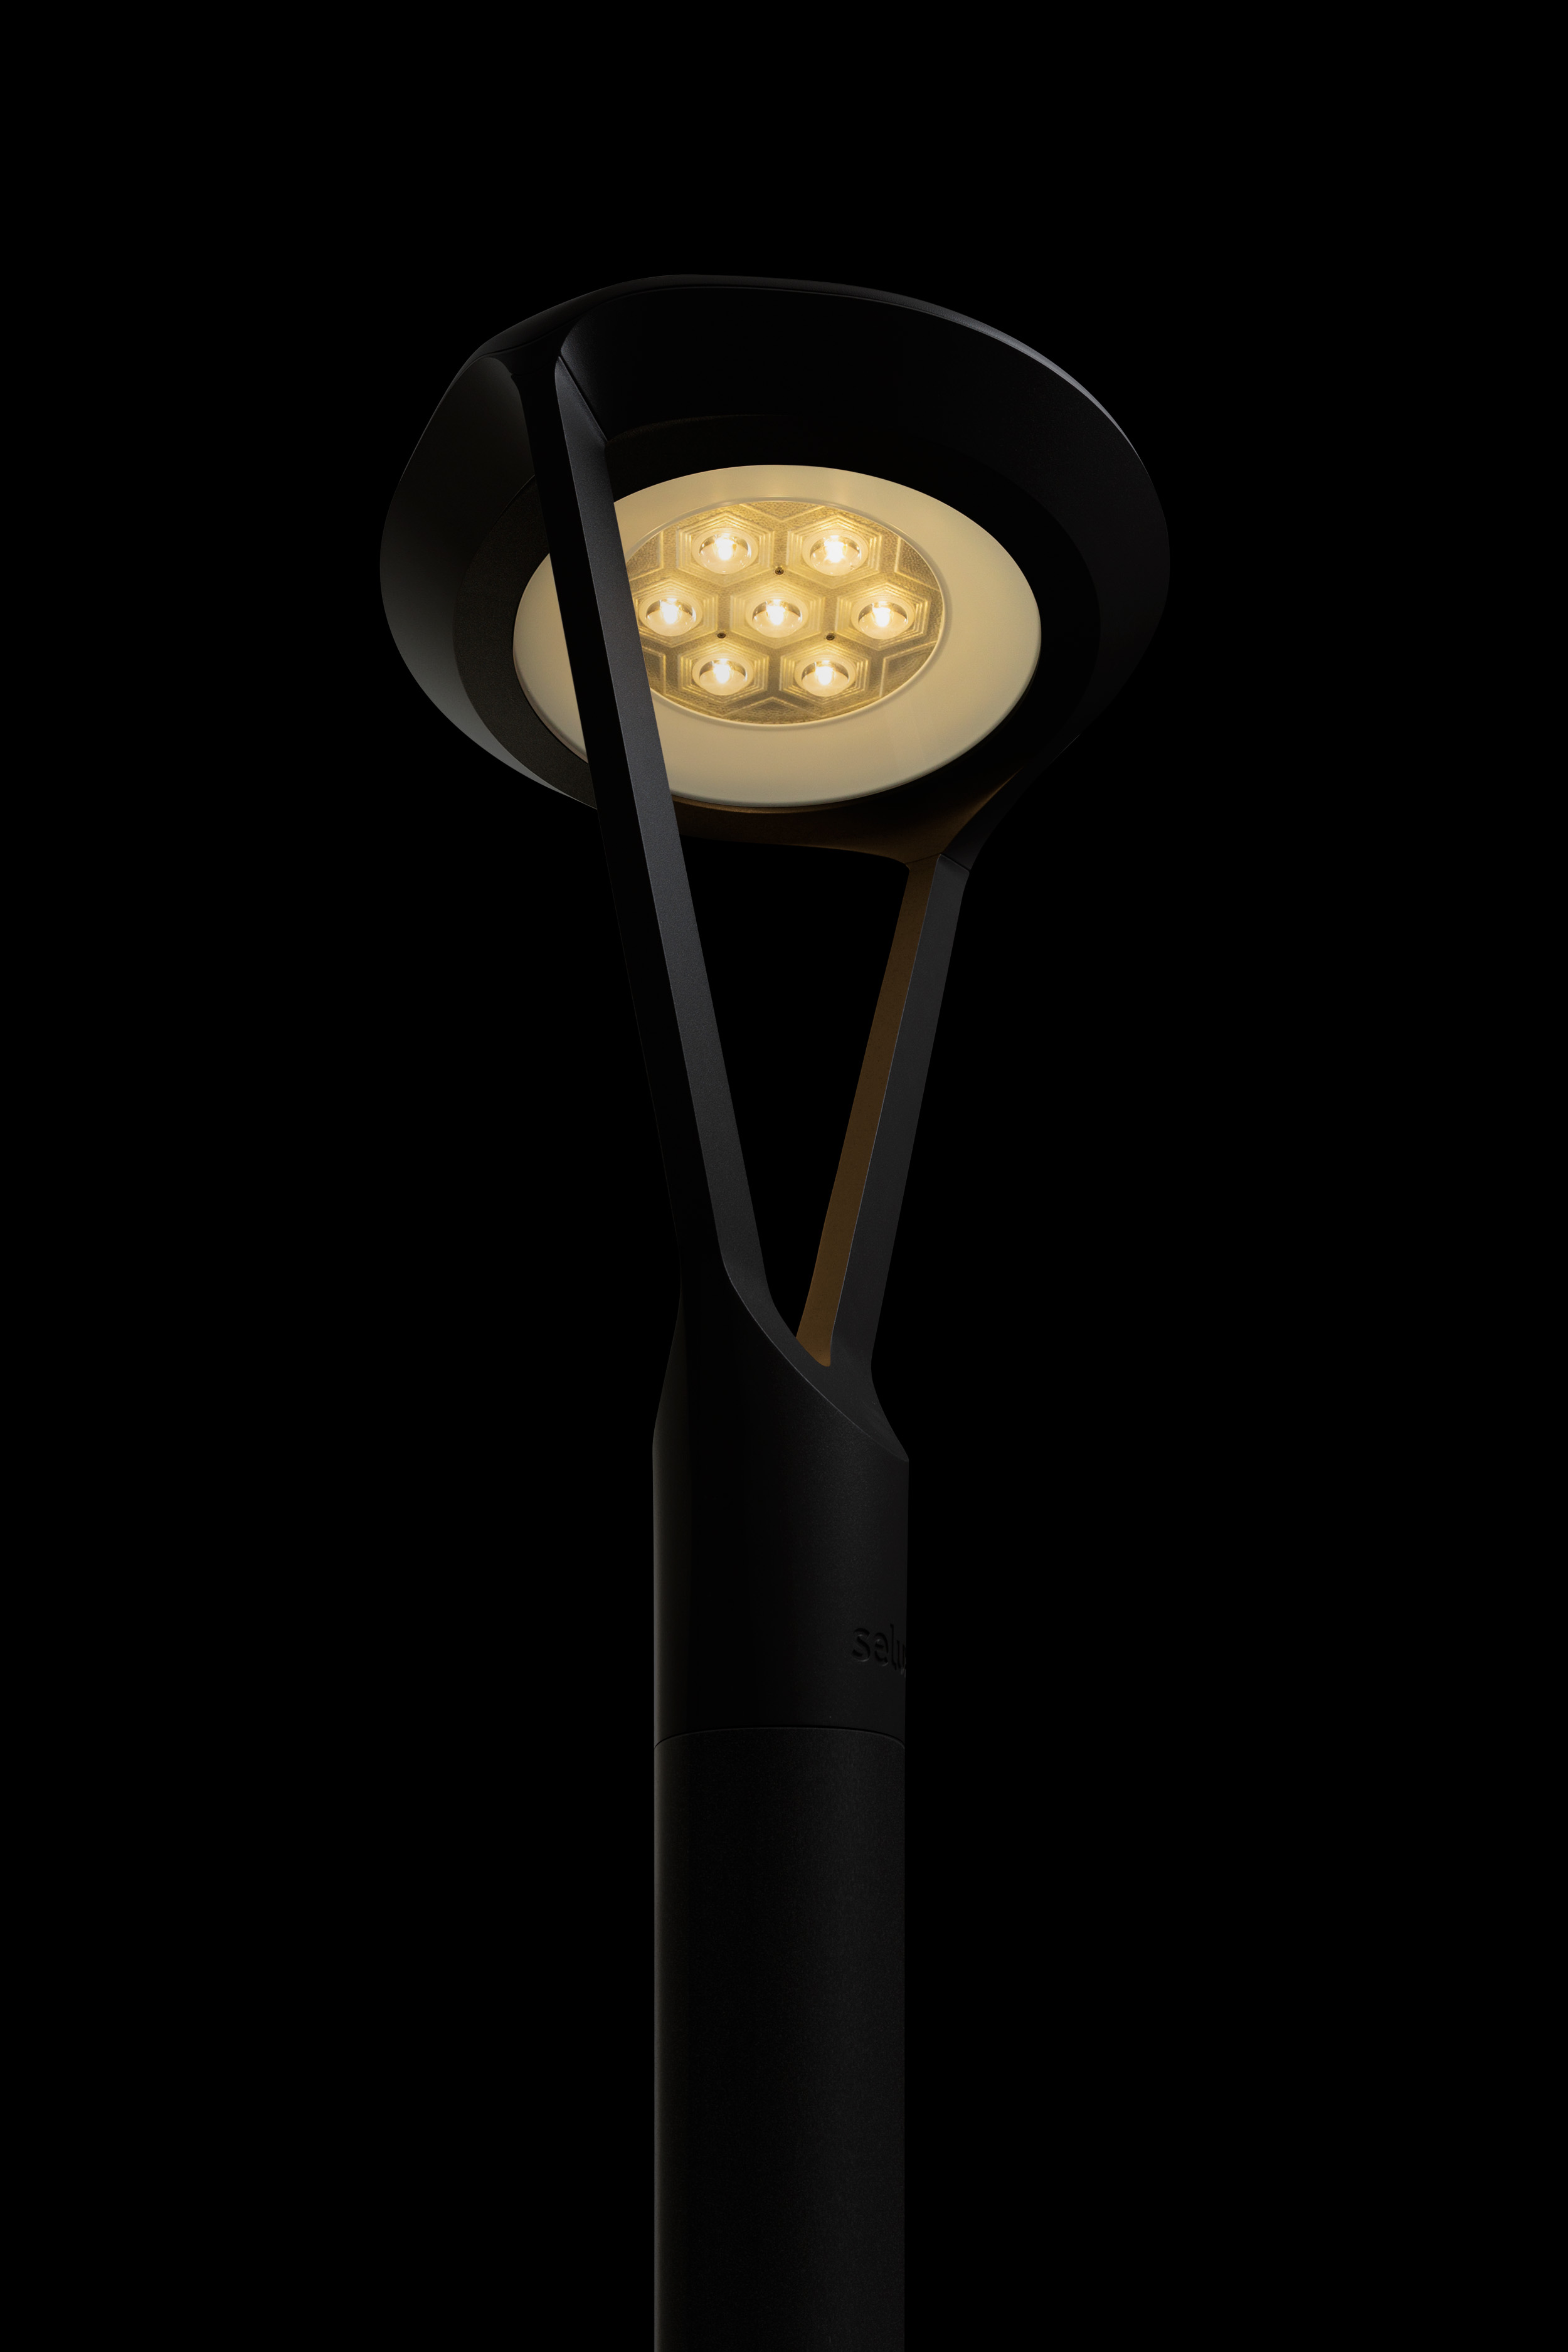 An image of Mistella luminaire on a black background at a low angle showing the light module.